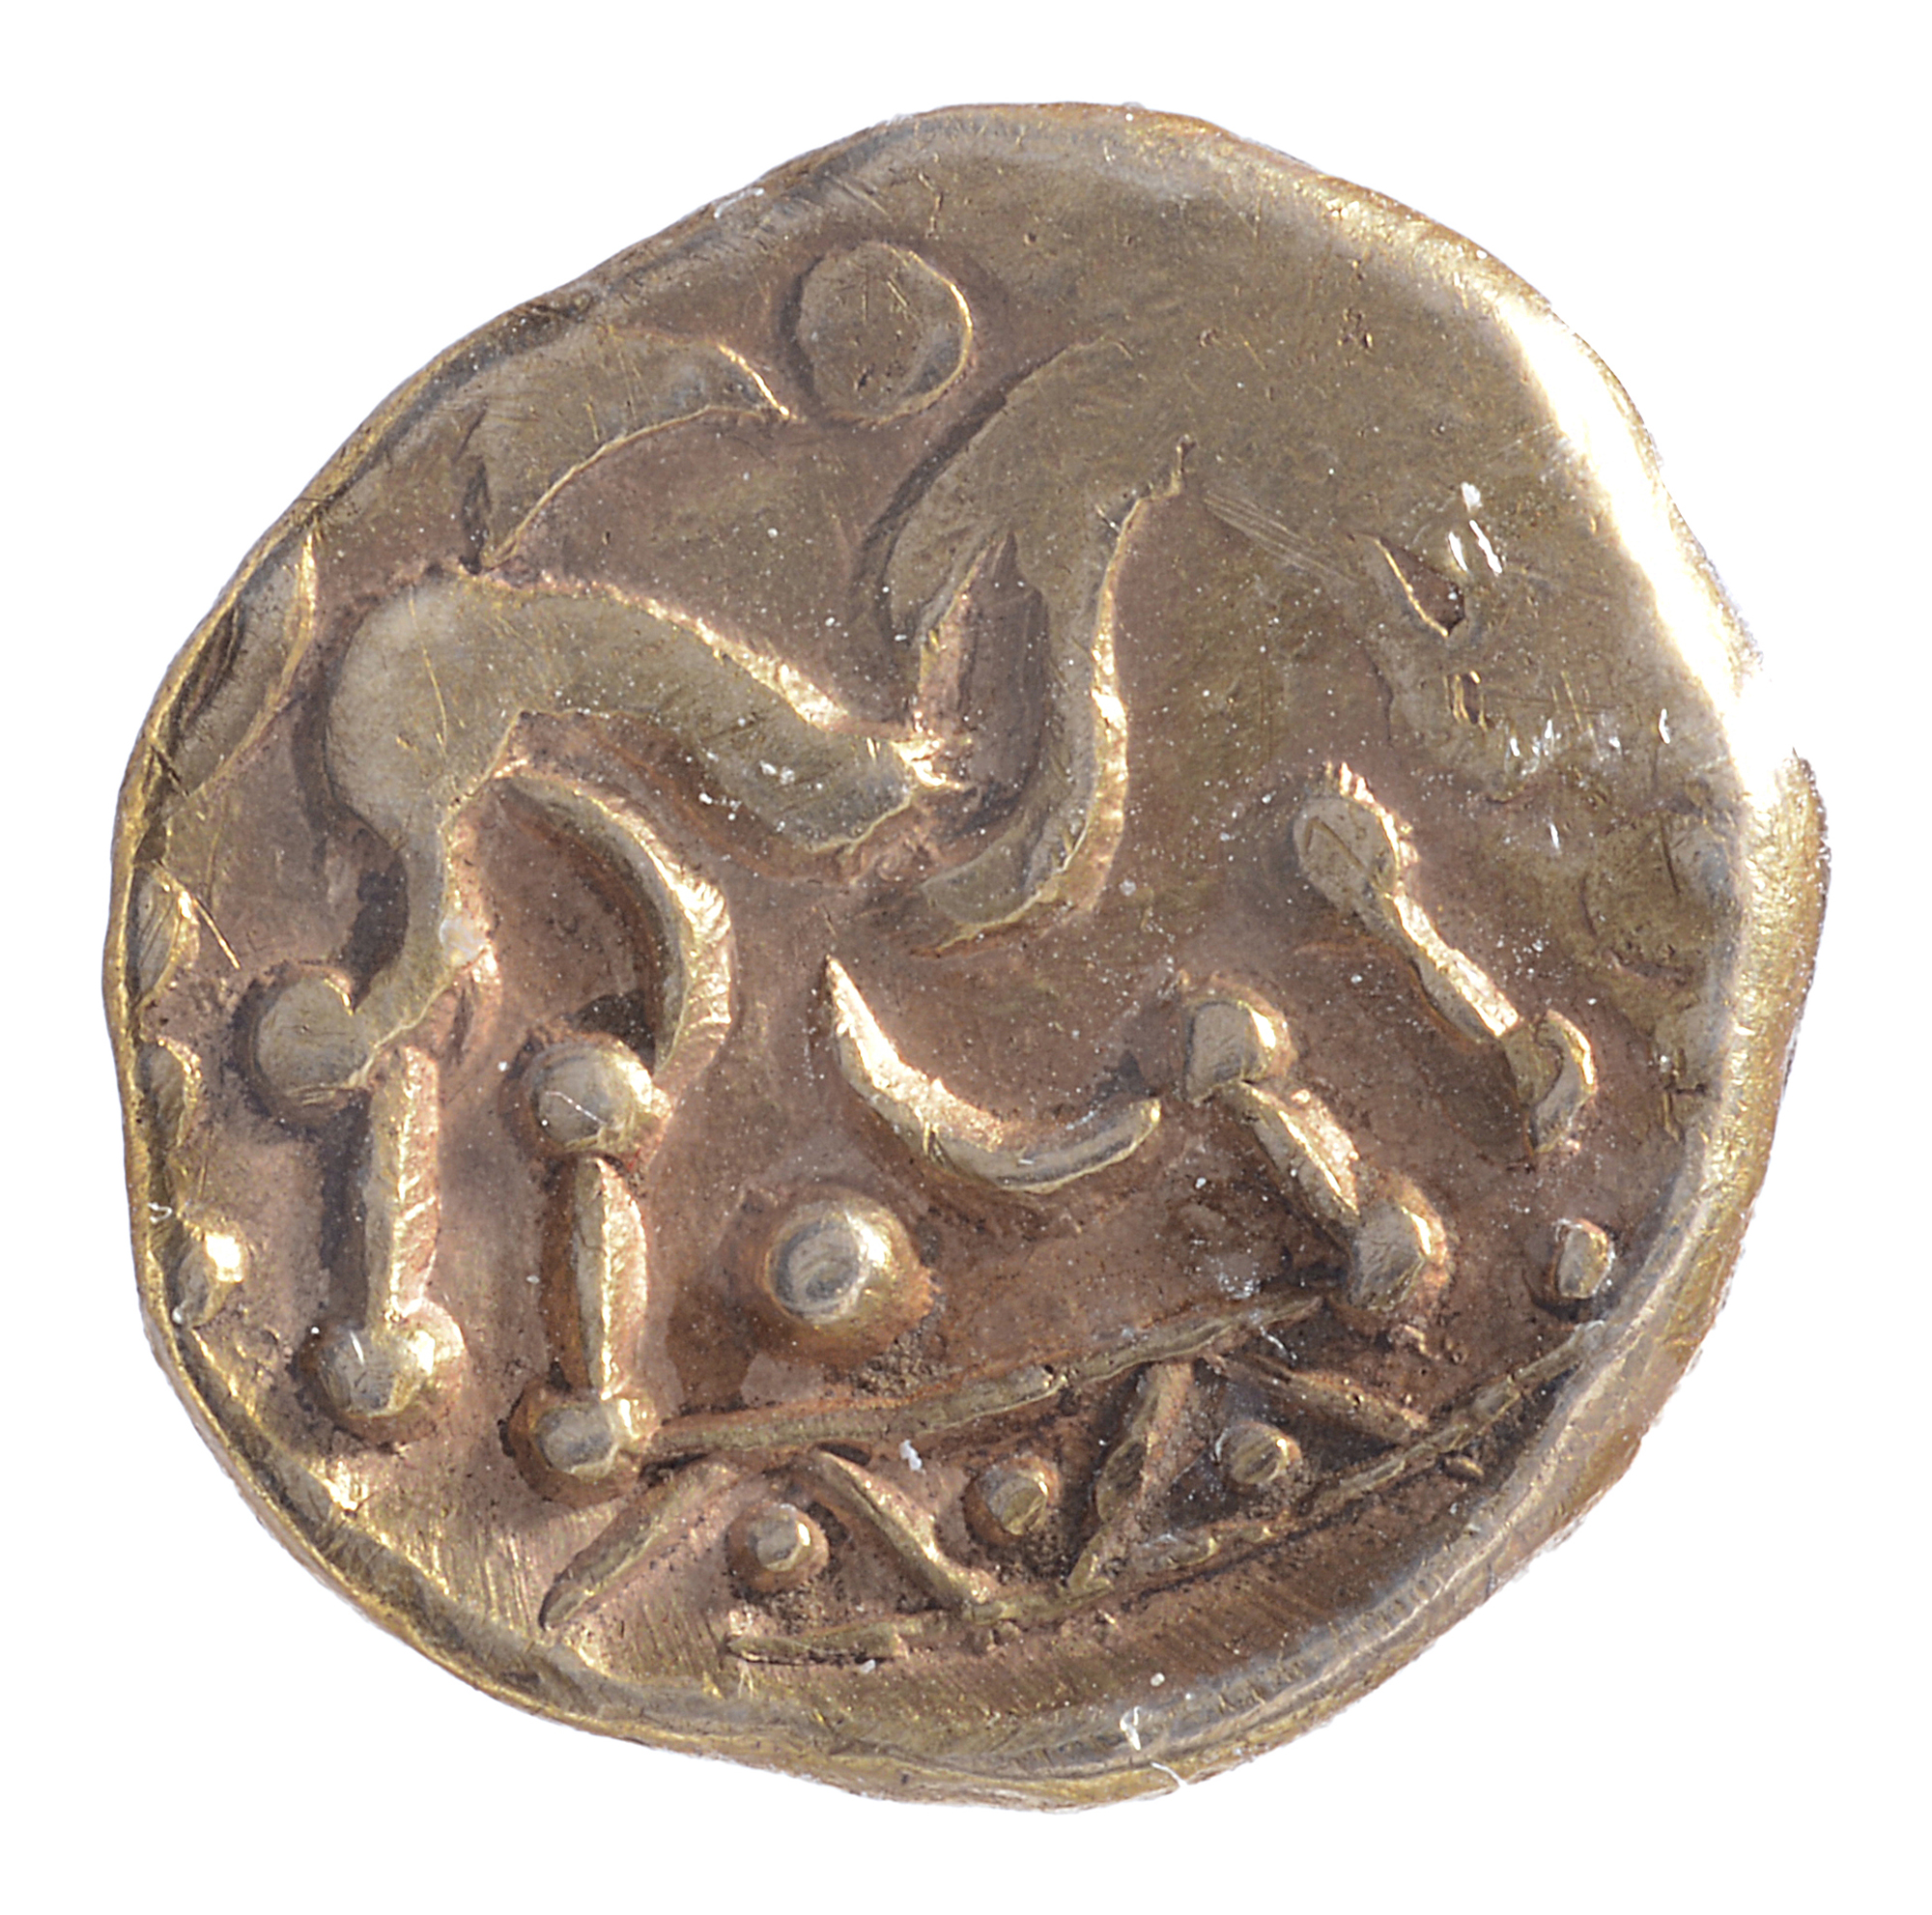 Celtic Britain, Corieltauvi, Gold Stater, c. 60-50 BCNorth East Coast type,disjointed horse facing